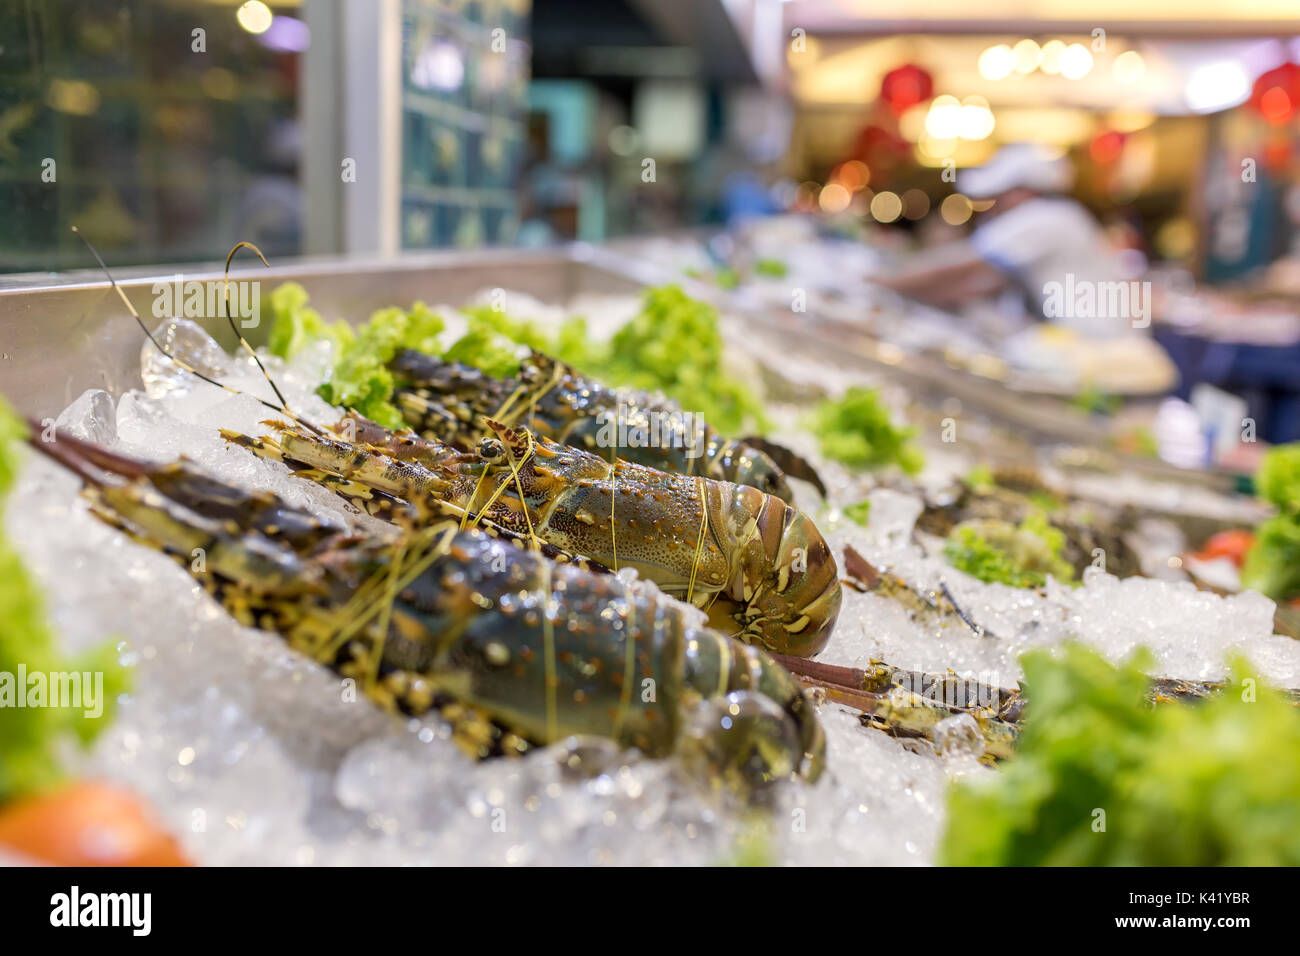 Fresh lobsters on ice. Street food in Asia spiny lobsters close-up. Stock Photo